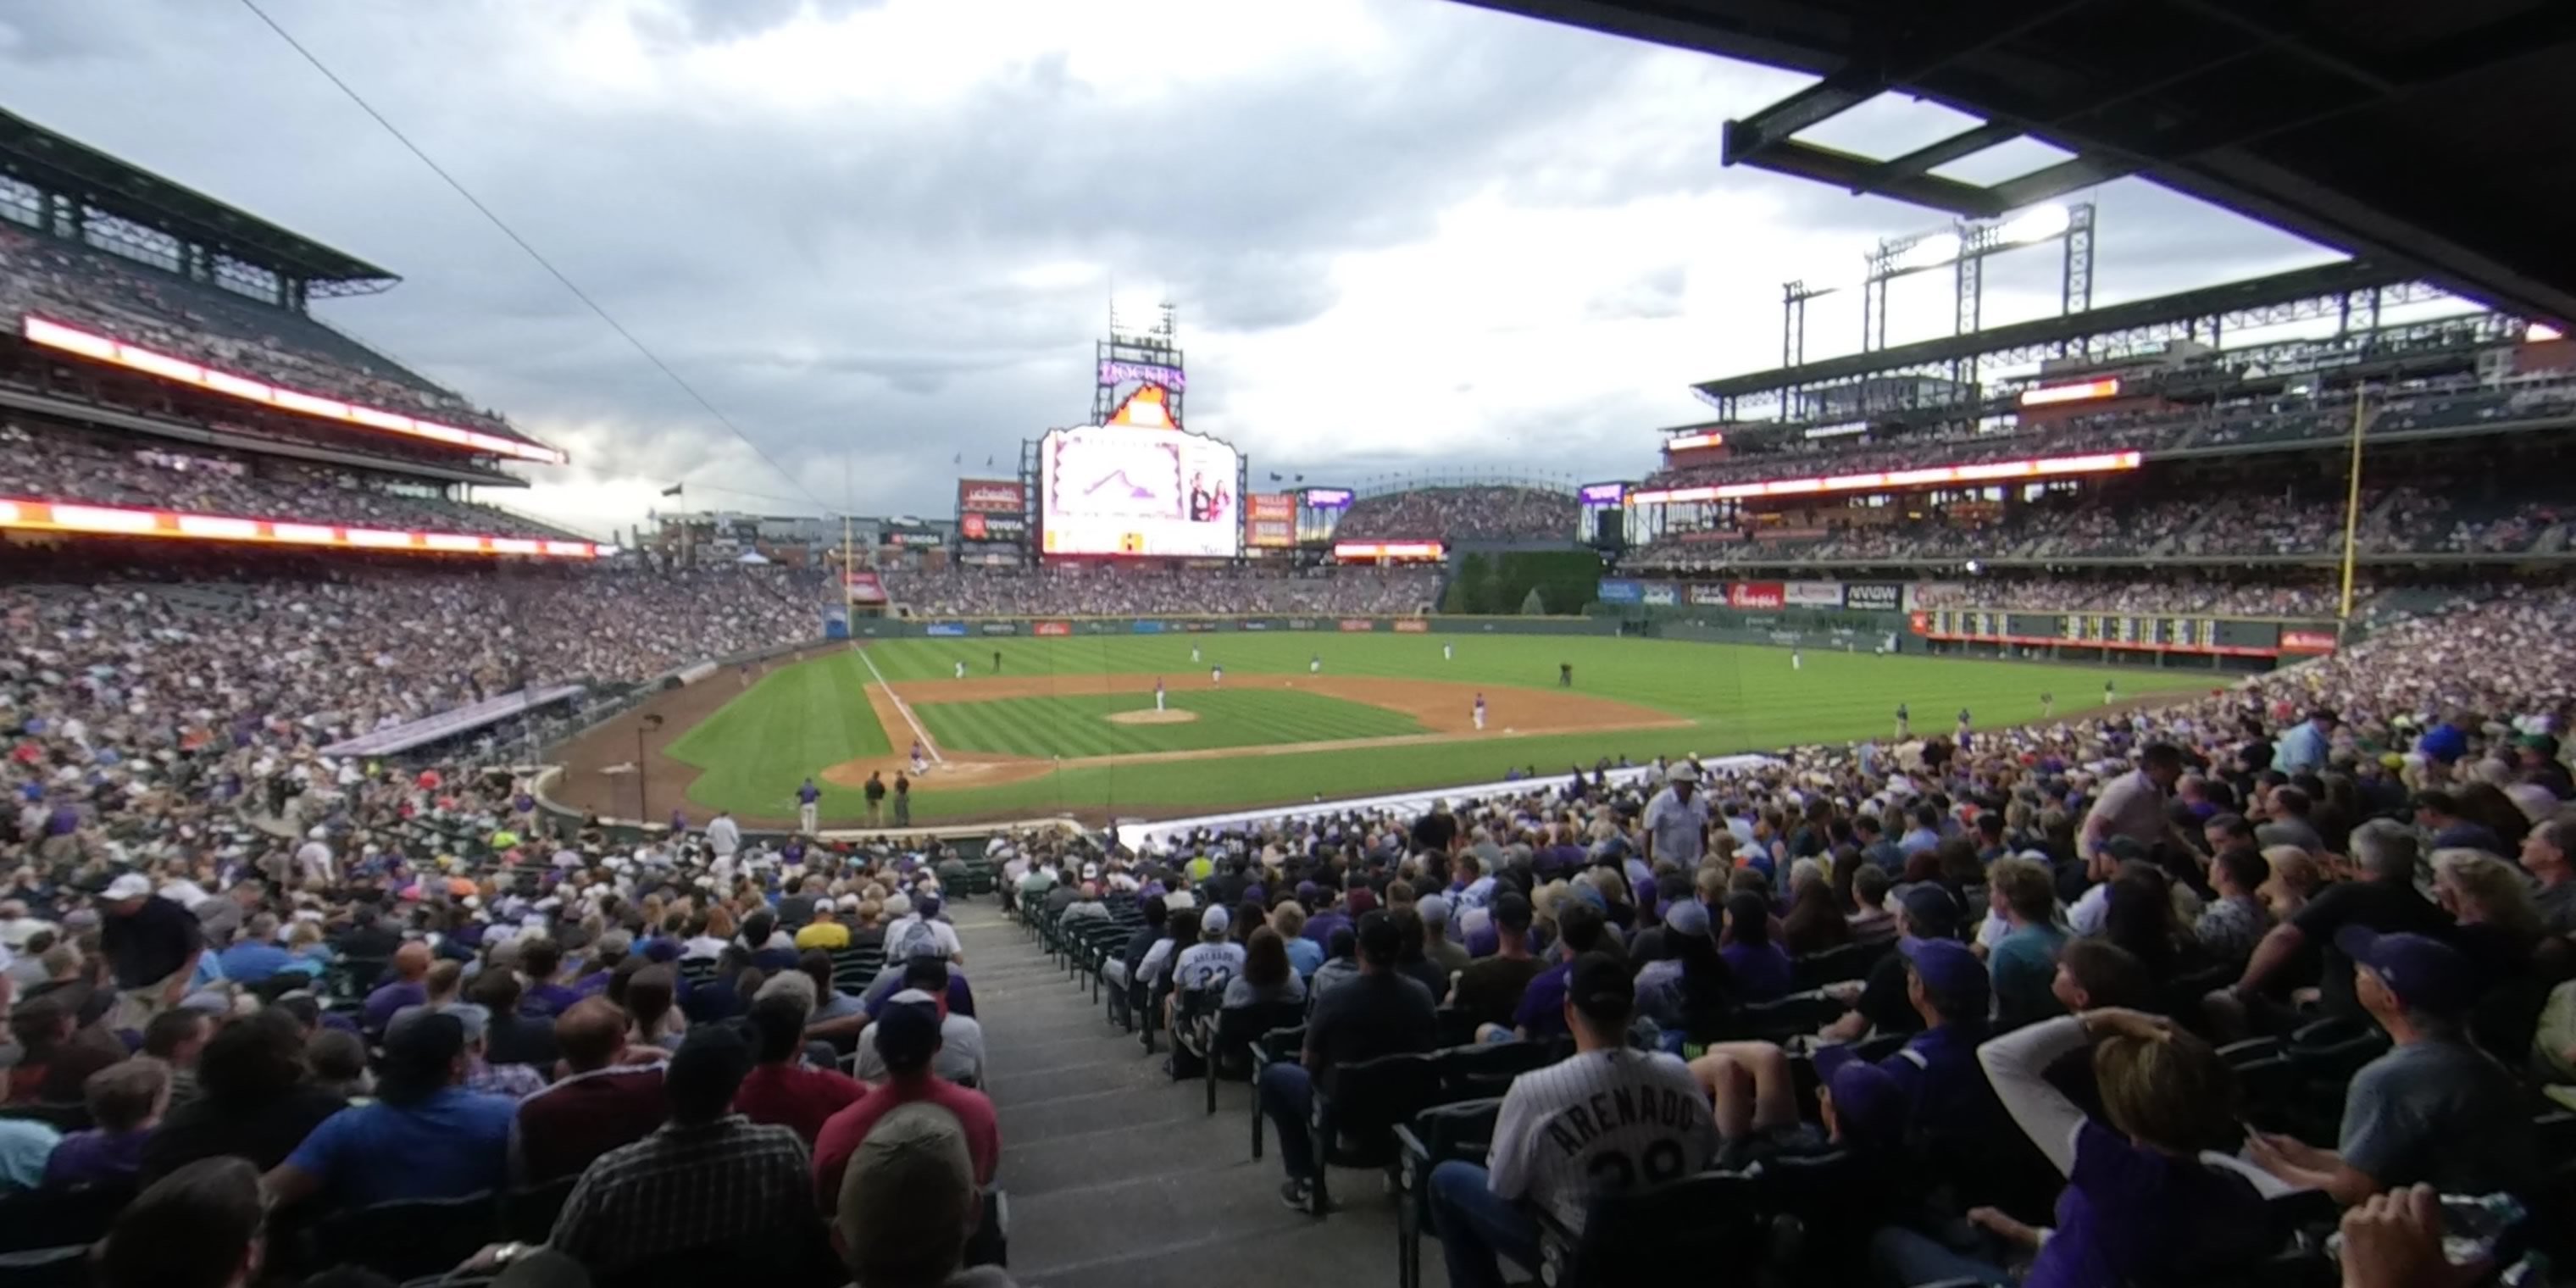 section 126 panoramic seat view  - coors field